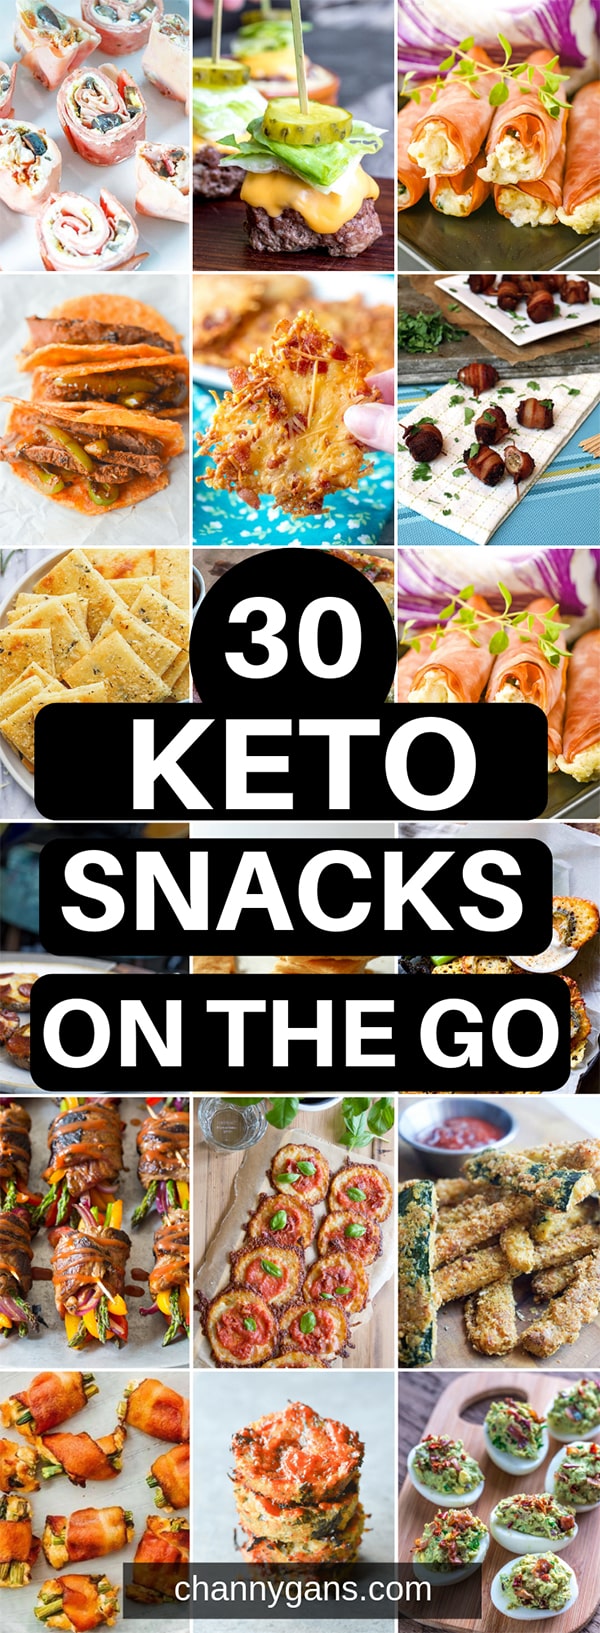 With these easy keto snacks on the go, you have no excuse not to stick to your keto diet. We've gathered 30 keto snacks that you can easily make ahead to grab and go on busy days.